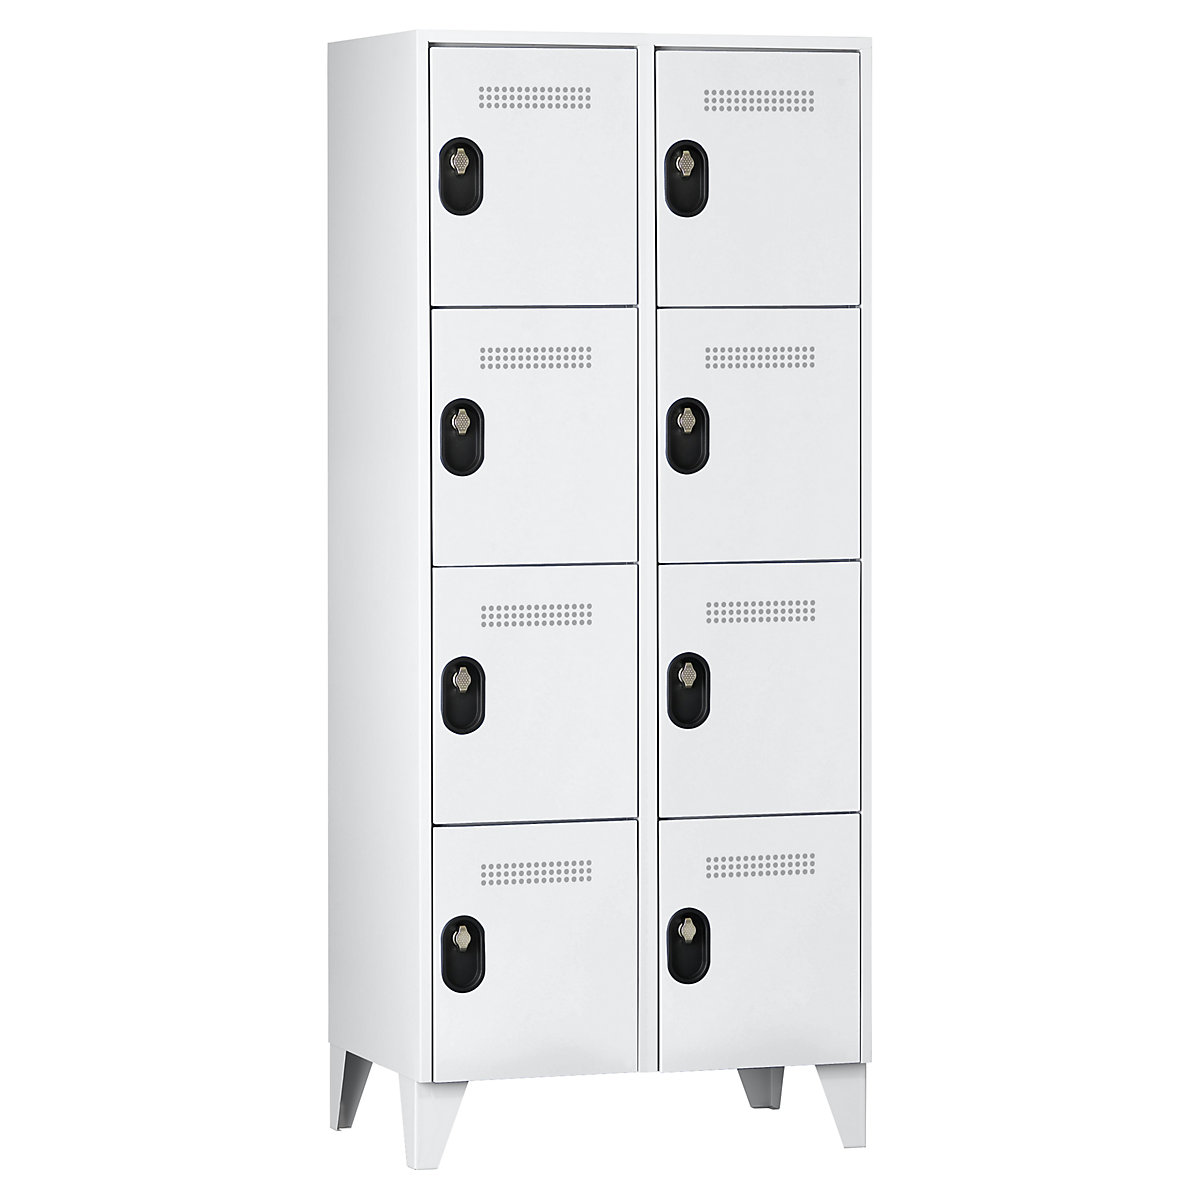 Compartment locker, compartment height 450 mm - Wolf